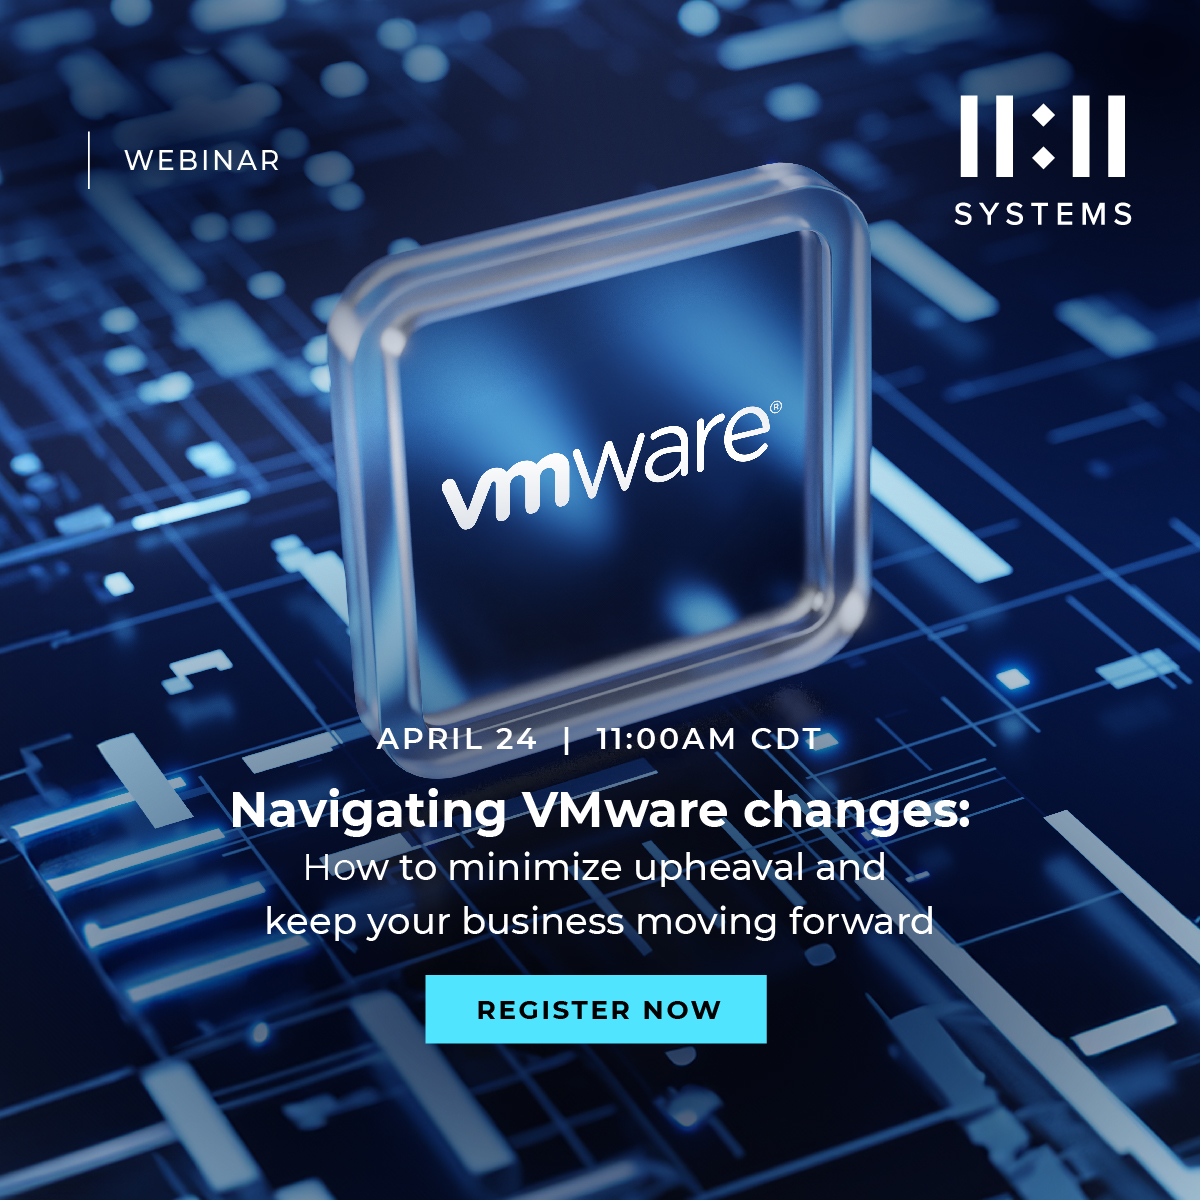 With the changes brought about by Broadcom’s acquisition of VMware, many organizations are unprepared. On April 24, we’ll discuss why 11:11’s close association as a VMware Pinnacle Partner can provide you with the best pricing and solution optimization. 1111systems.com/wb-apr-vmware/…